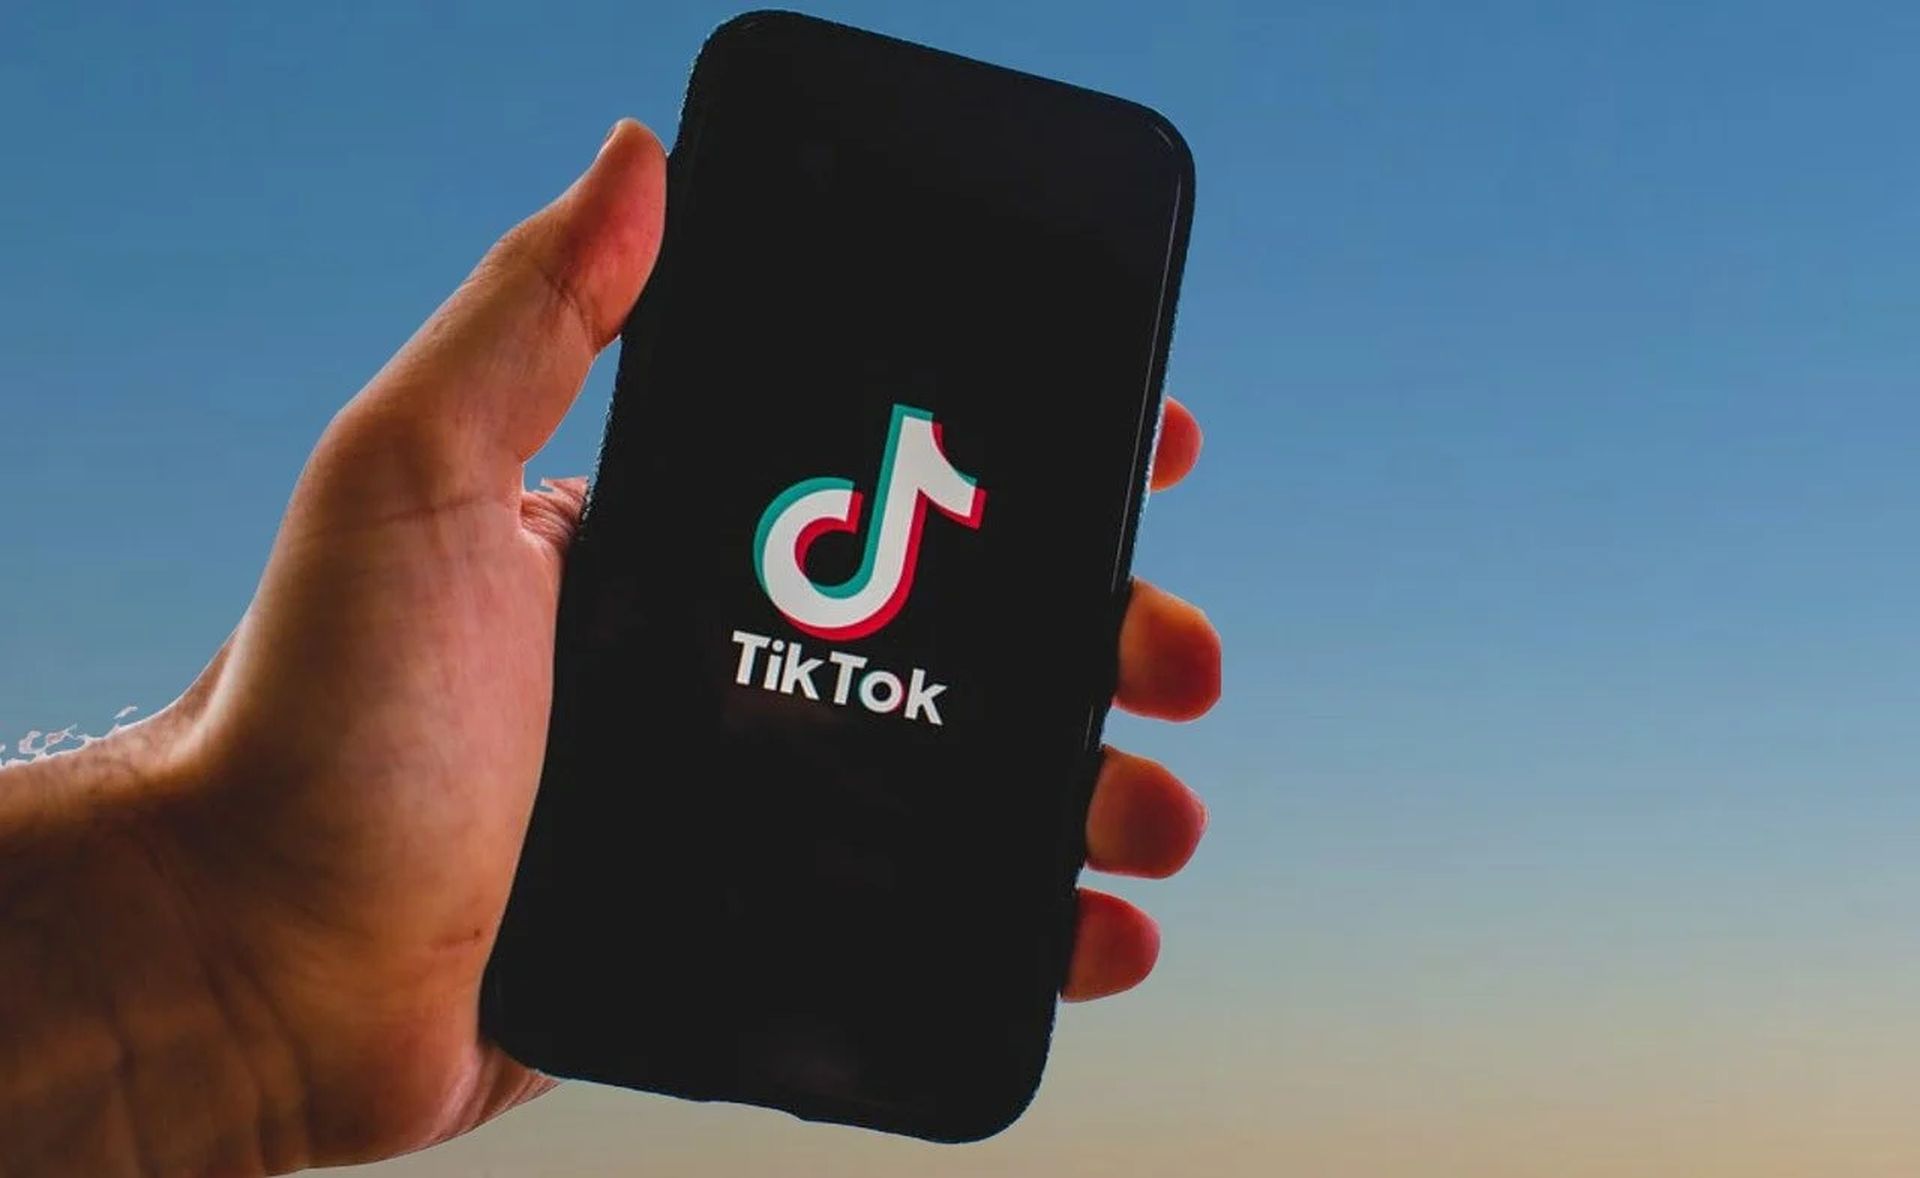 Why is TikTok banned on House-issued phones?